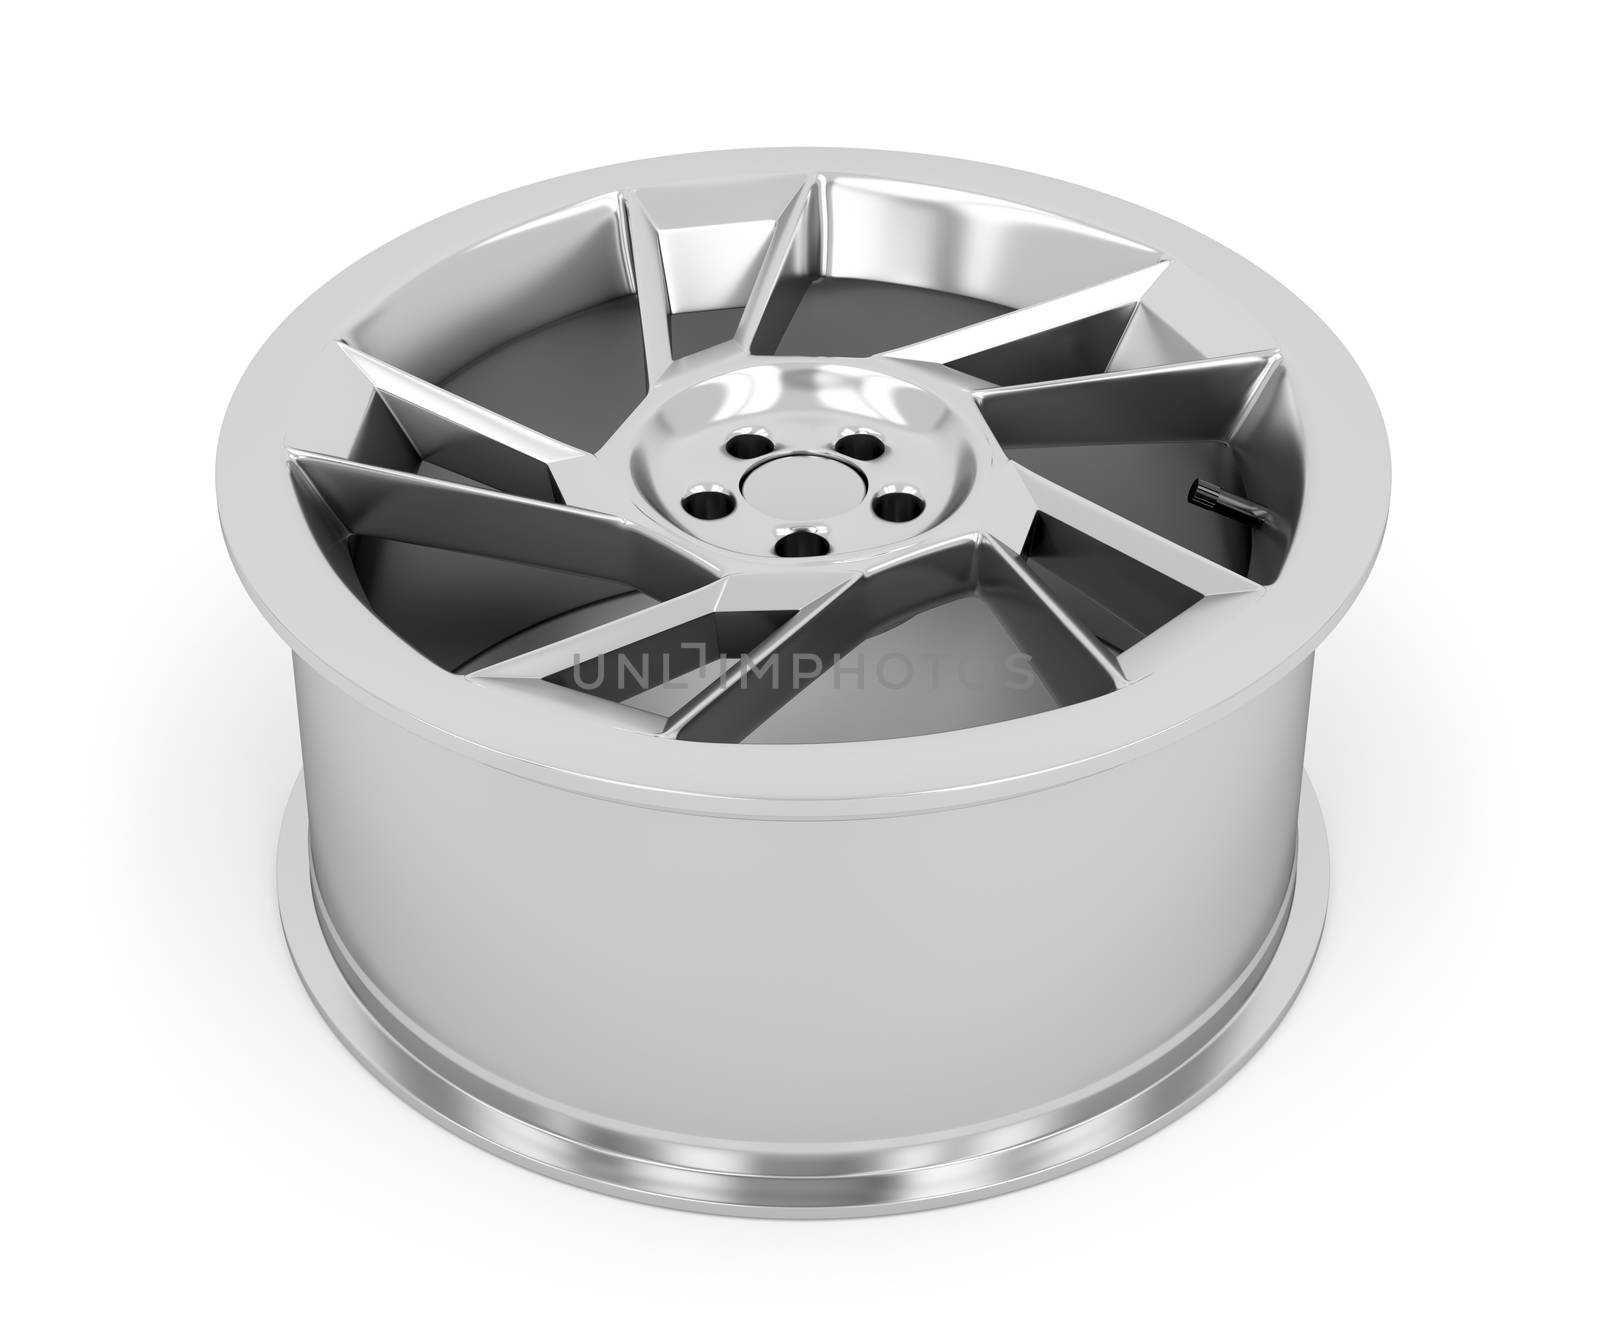 Alloy rim by magraphics